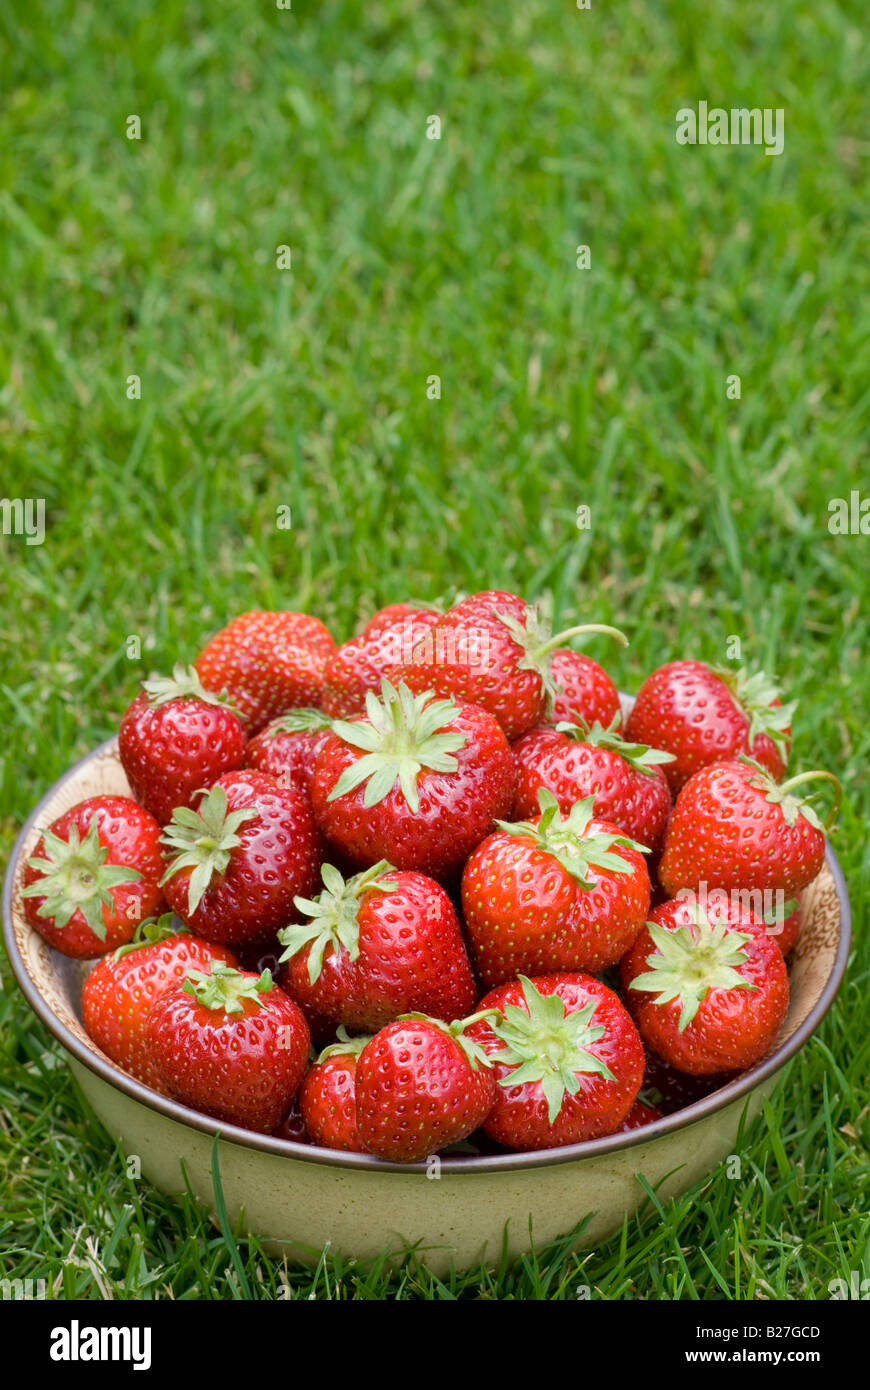 A bowl of freshly picked strawberries on green grass outside Stock Photo